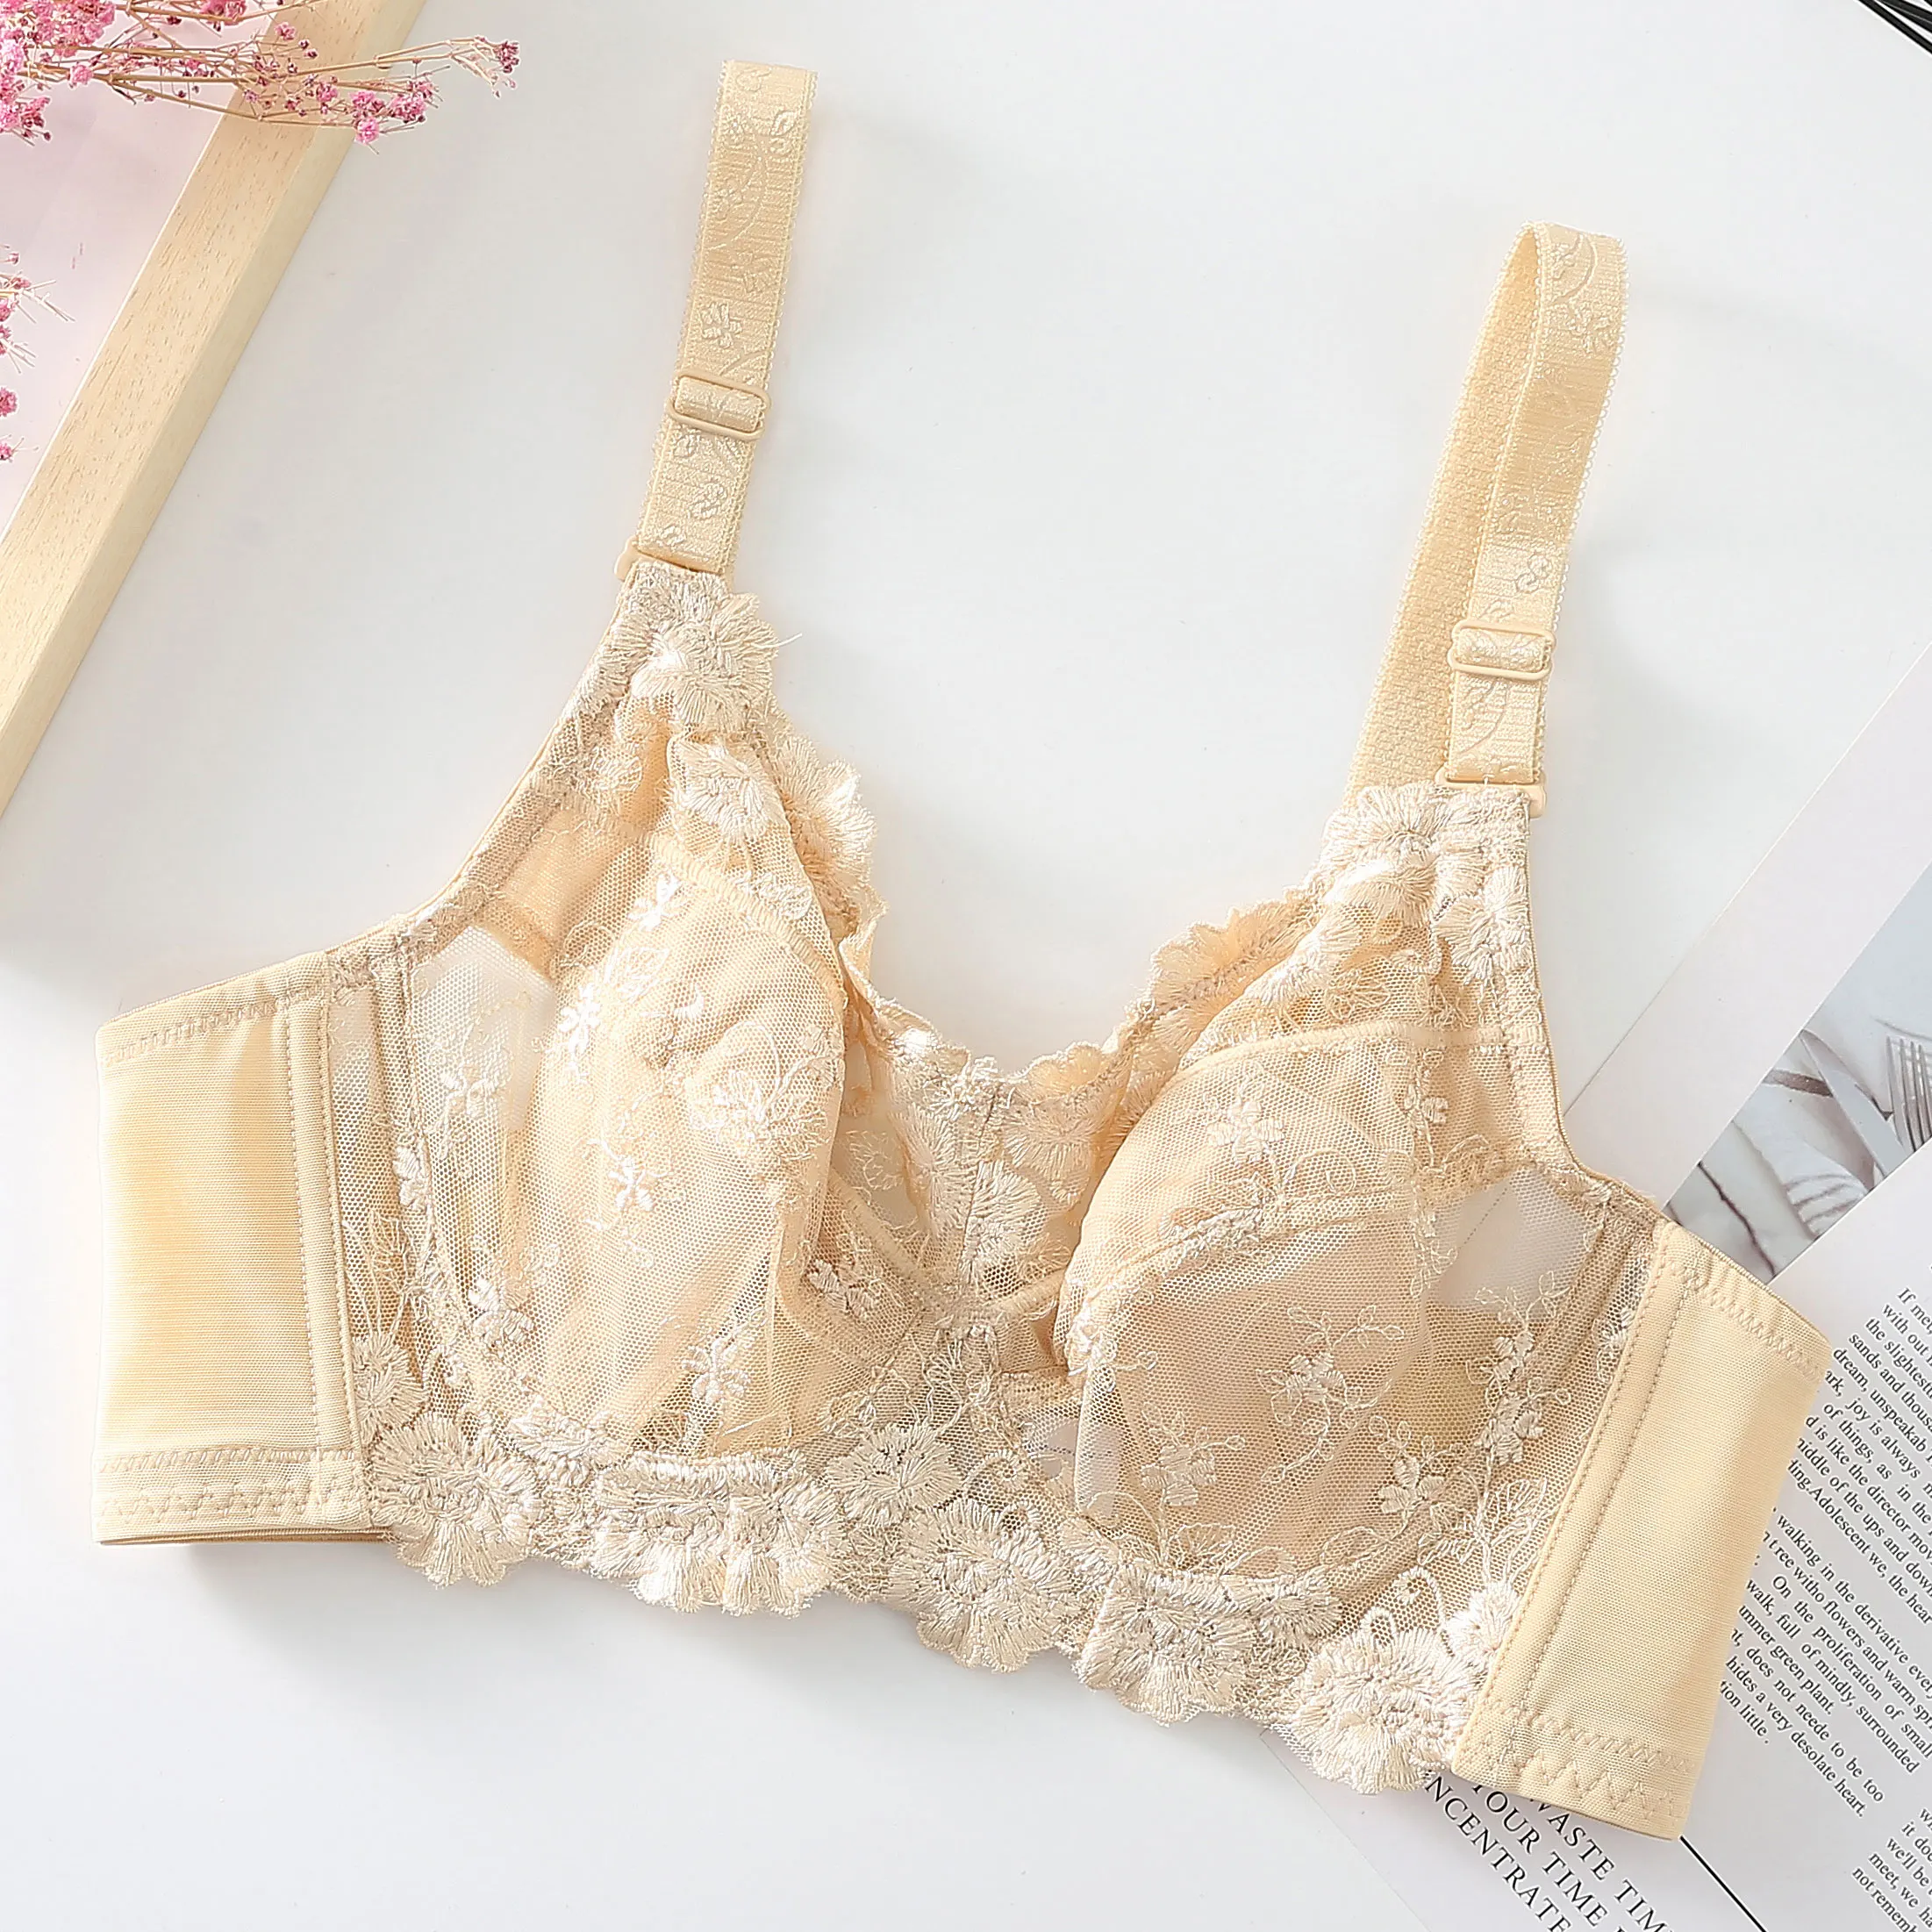 

Womens Ultra Thin Lace Bra Full Coverage Embrodiery Lingerie 34F 36F 38F 40F 42F 44F 46F 48F B C D E F Bulk Items Wholesale Lots